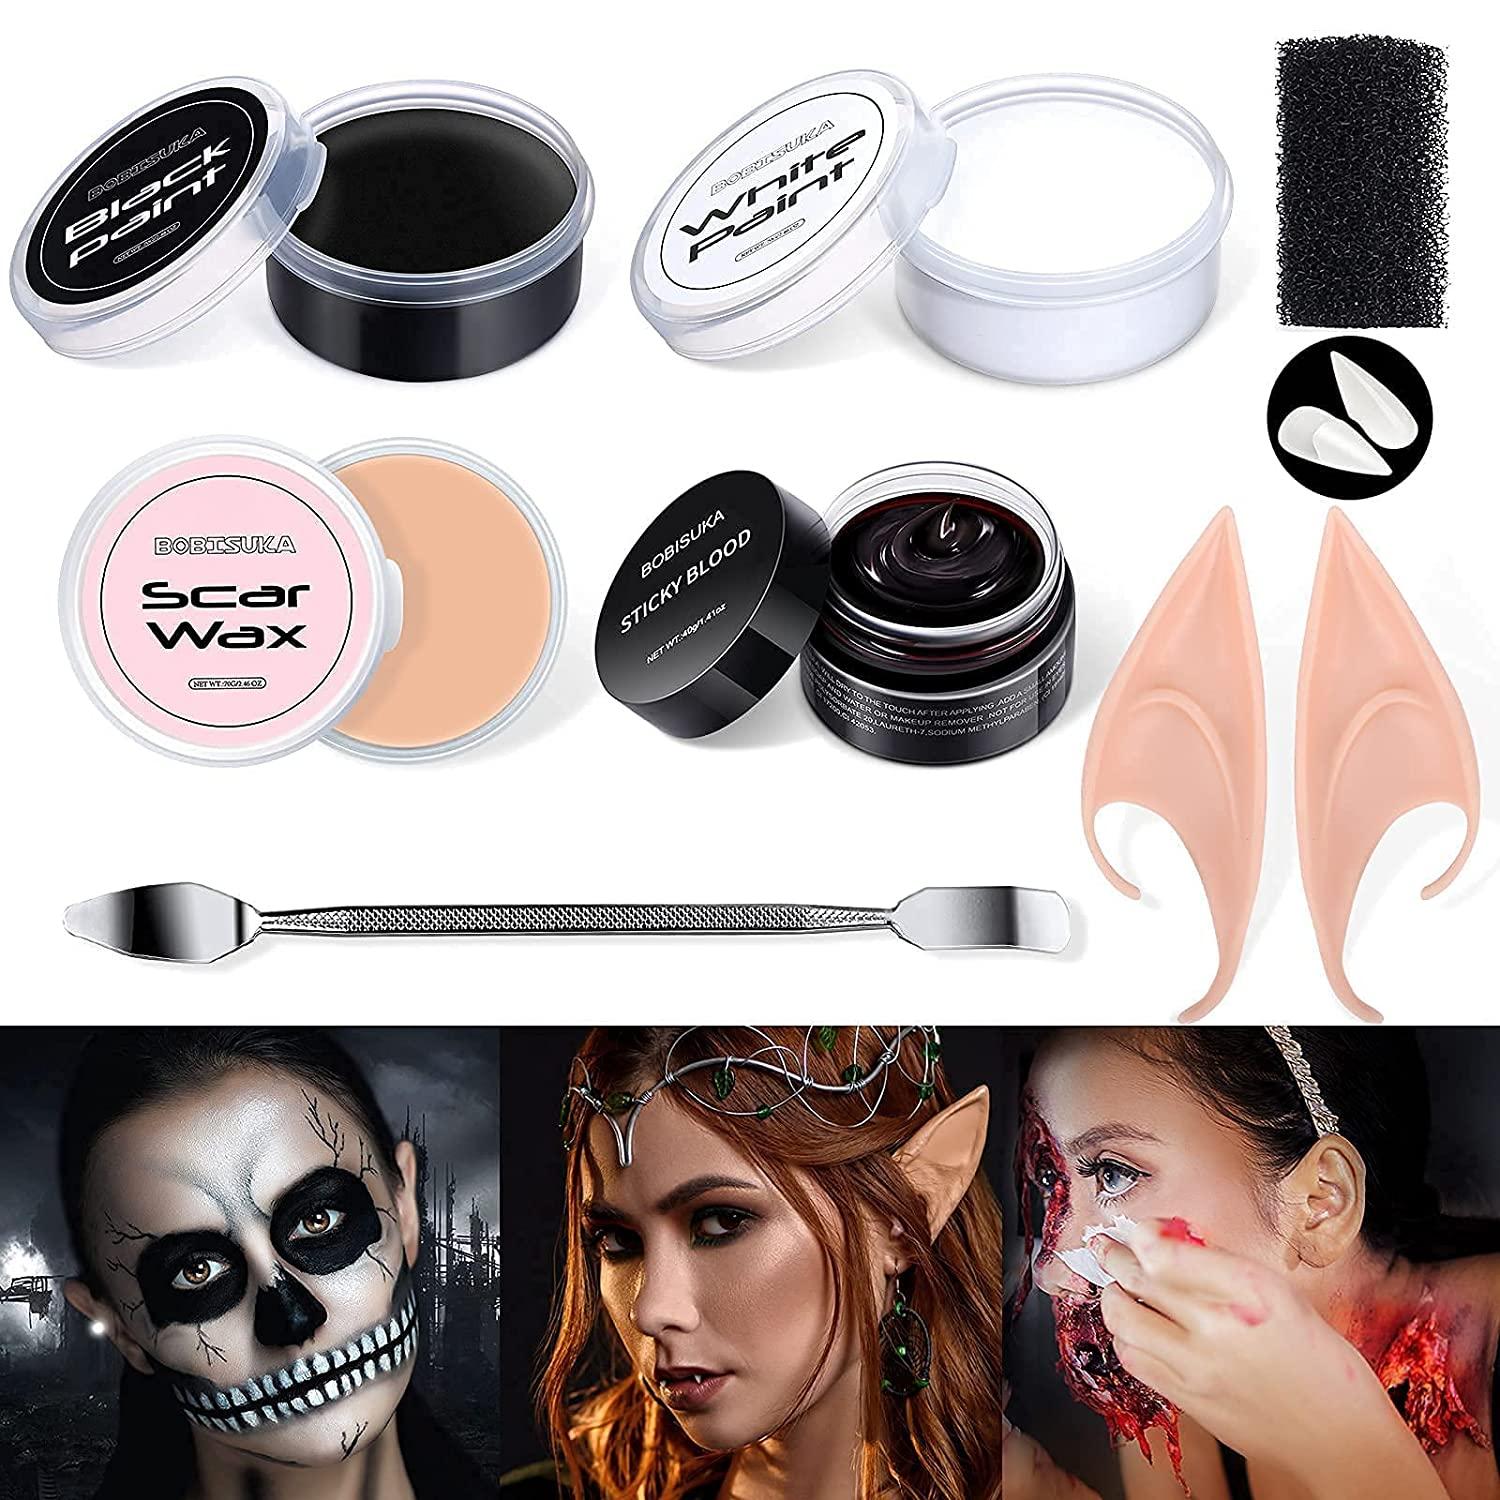 immetee Scar Wax SFX Makeup Kit, Face & Body Paint, Christmas Halloween Makeup  Kit, Fake Blood, Painting Brushes, Spatula, Stipple Sponge, Stage Theatrical  Party Cosplay, Carnival